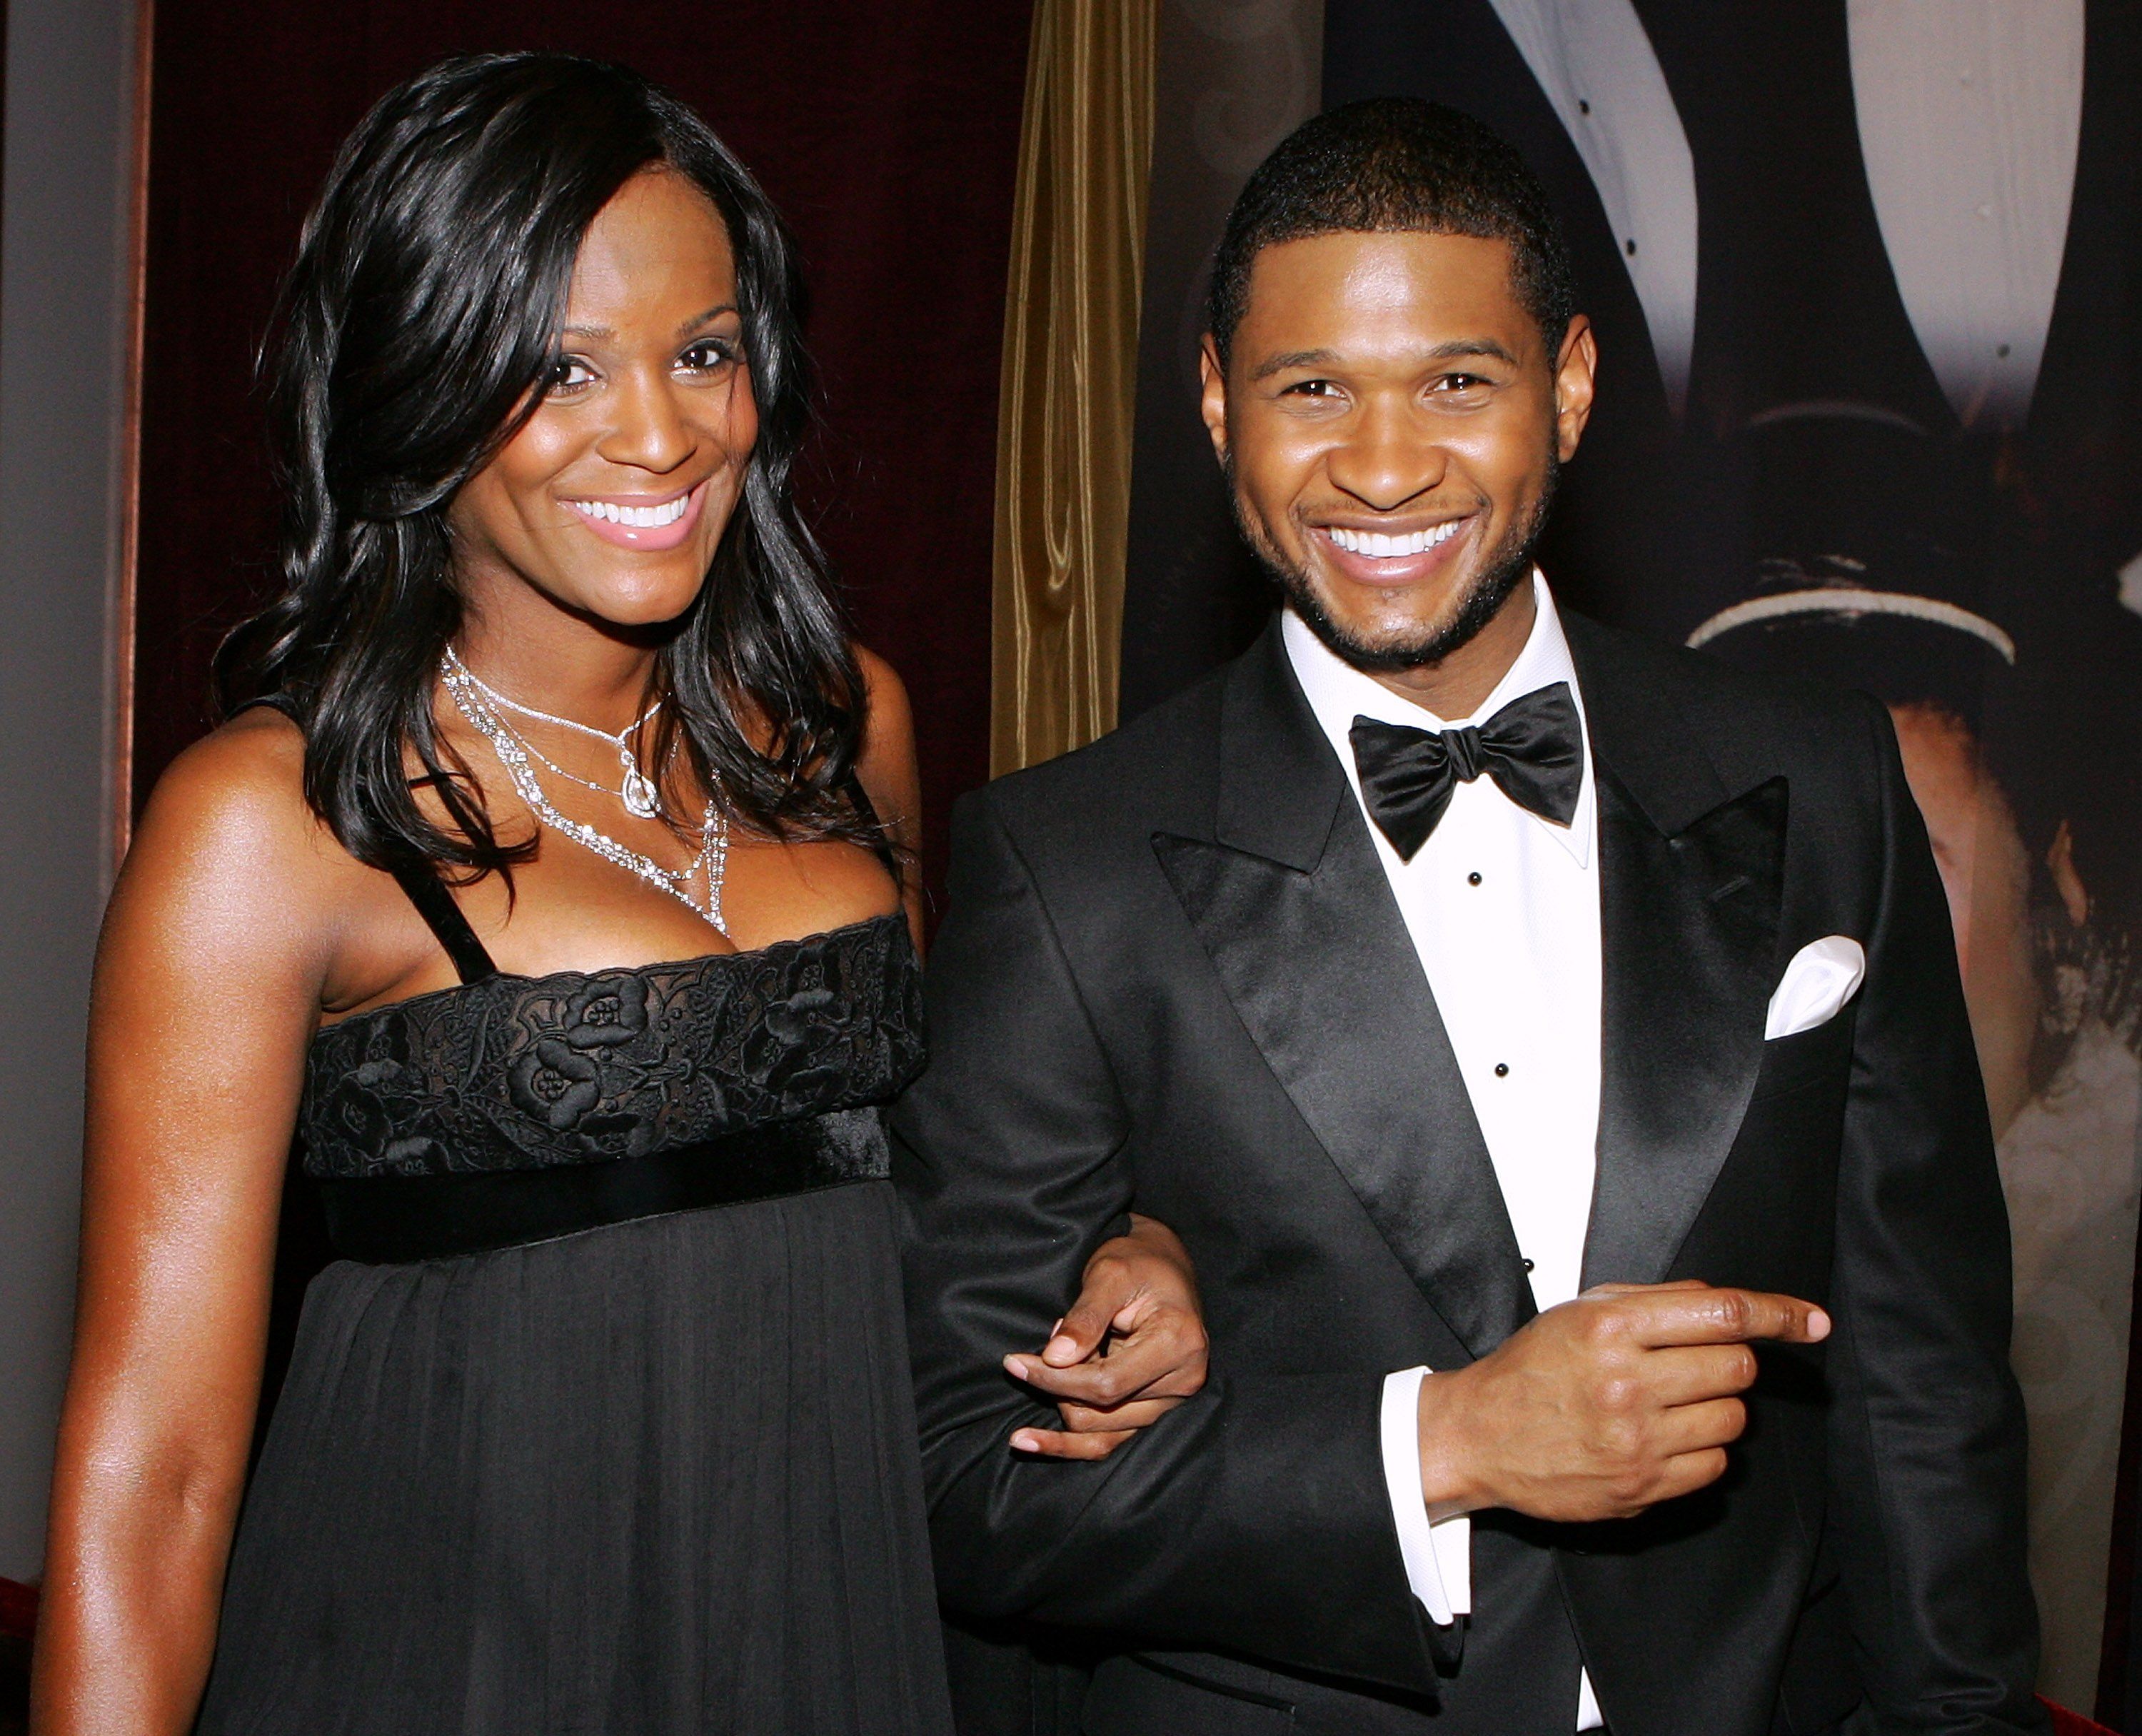 Usher Raymond and Tameka Foster attend the 15th annual Trumpet Awards at the Bellagio January 22, 2007 in Las Vegas, Nevada. | Source: Getty Images